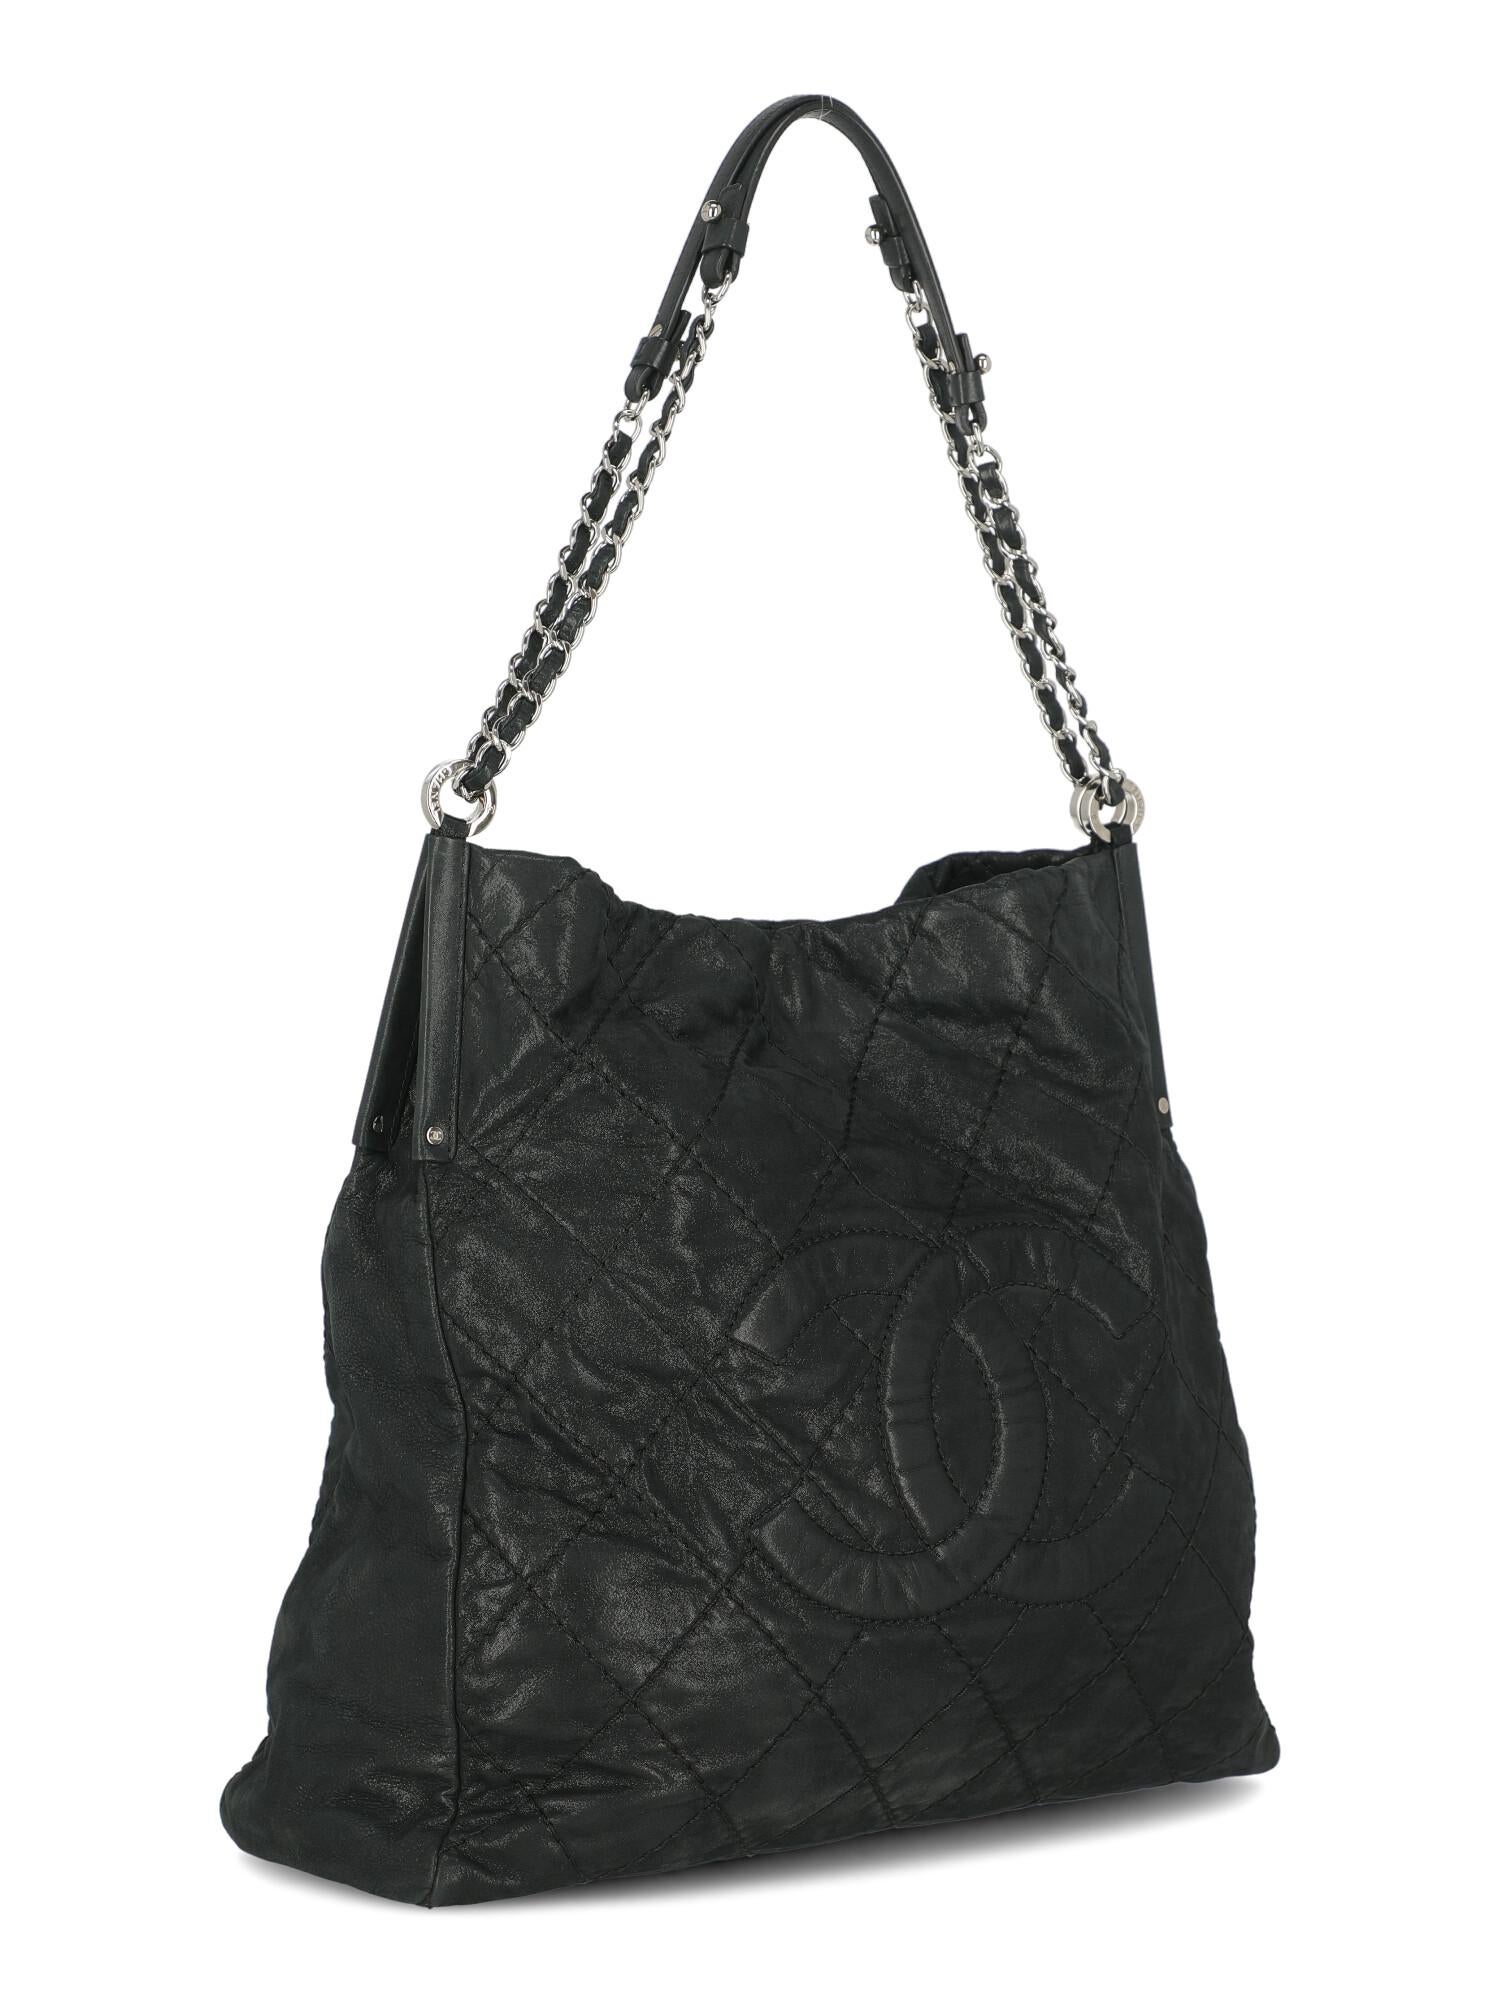 Chanel Women's Tote Bags Black Leather In Good Condition For Sale In Milan, IT